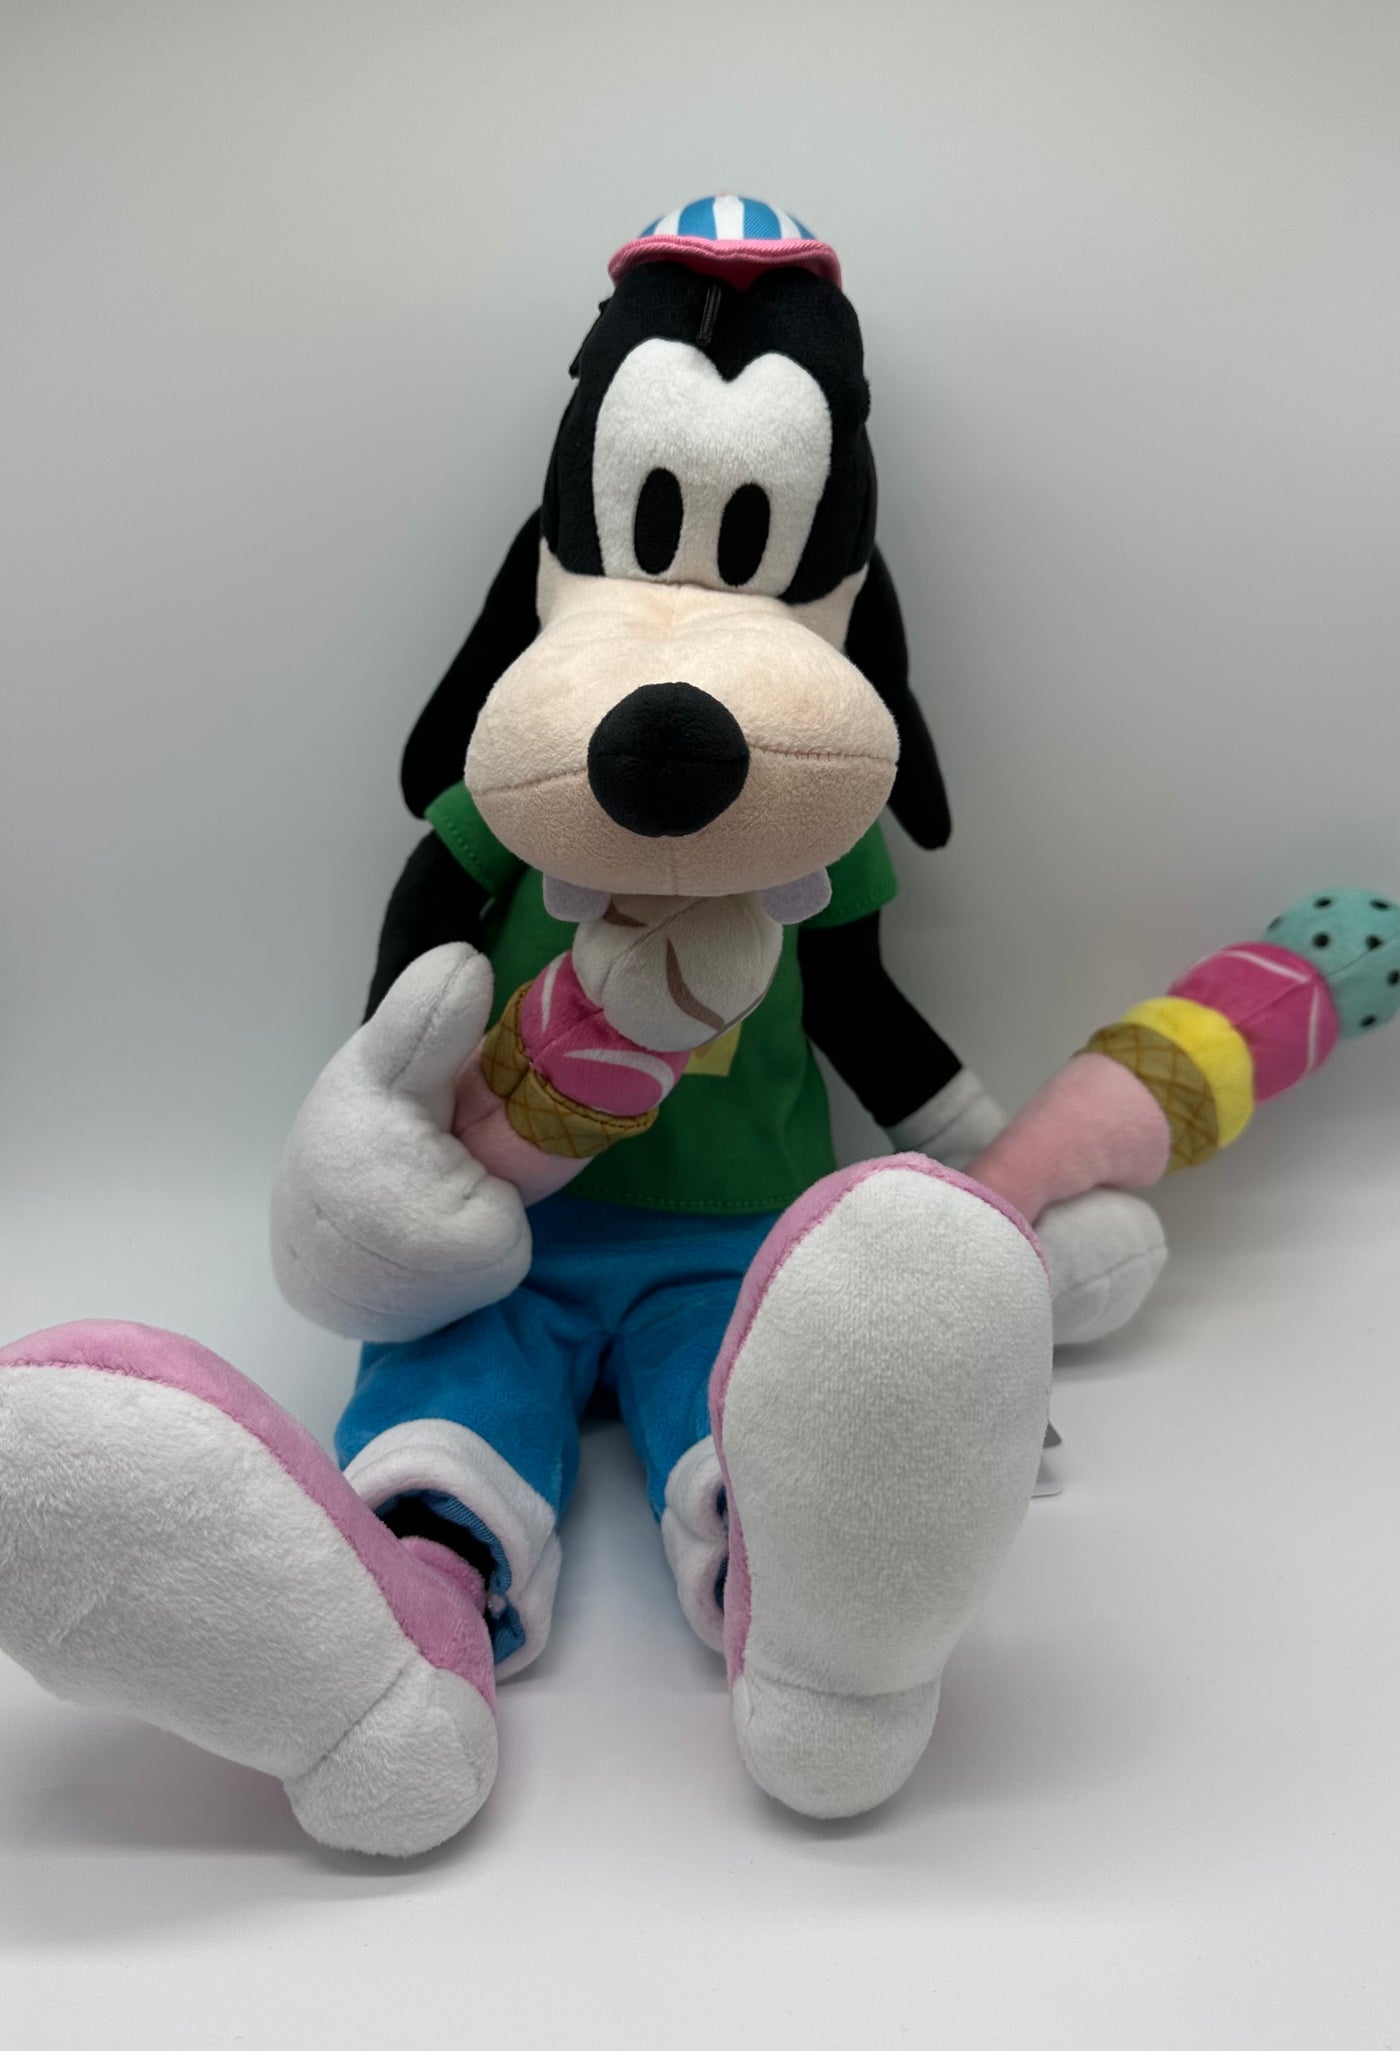 Disney Store Japan Authentic Goofy with Ice Cream Plush New with Tag